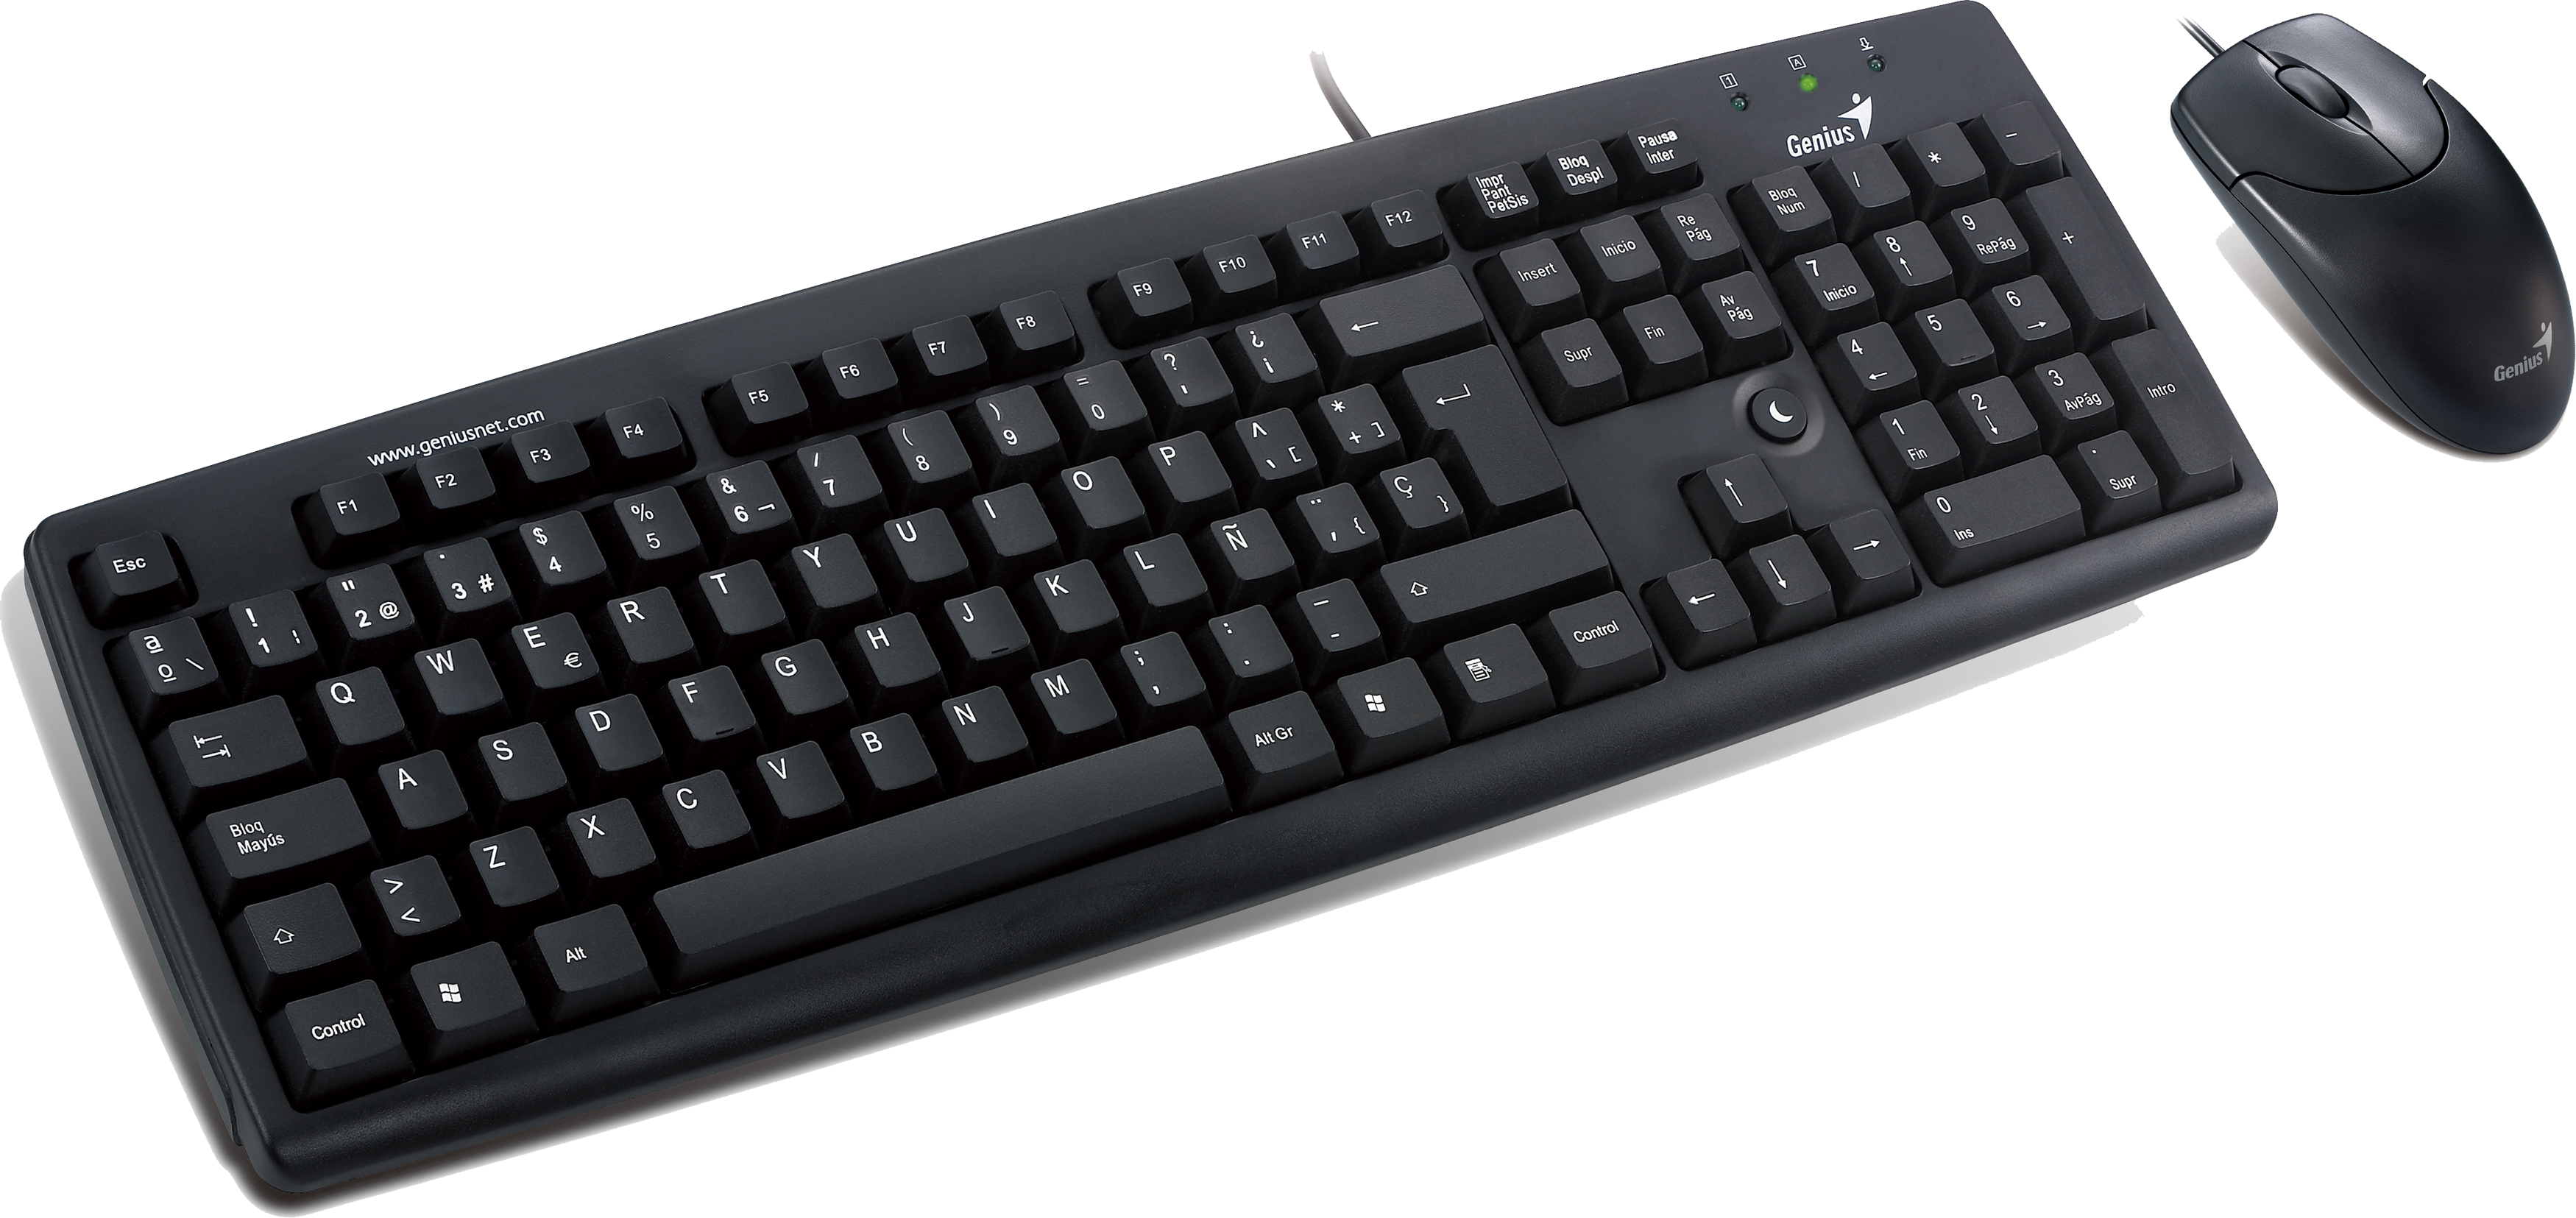 And Mouse Black Keyboard HD Image Free PNG Image